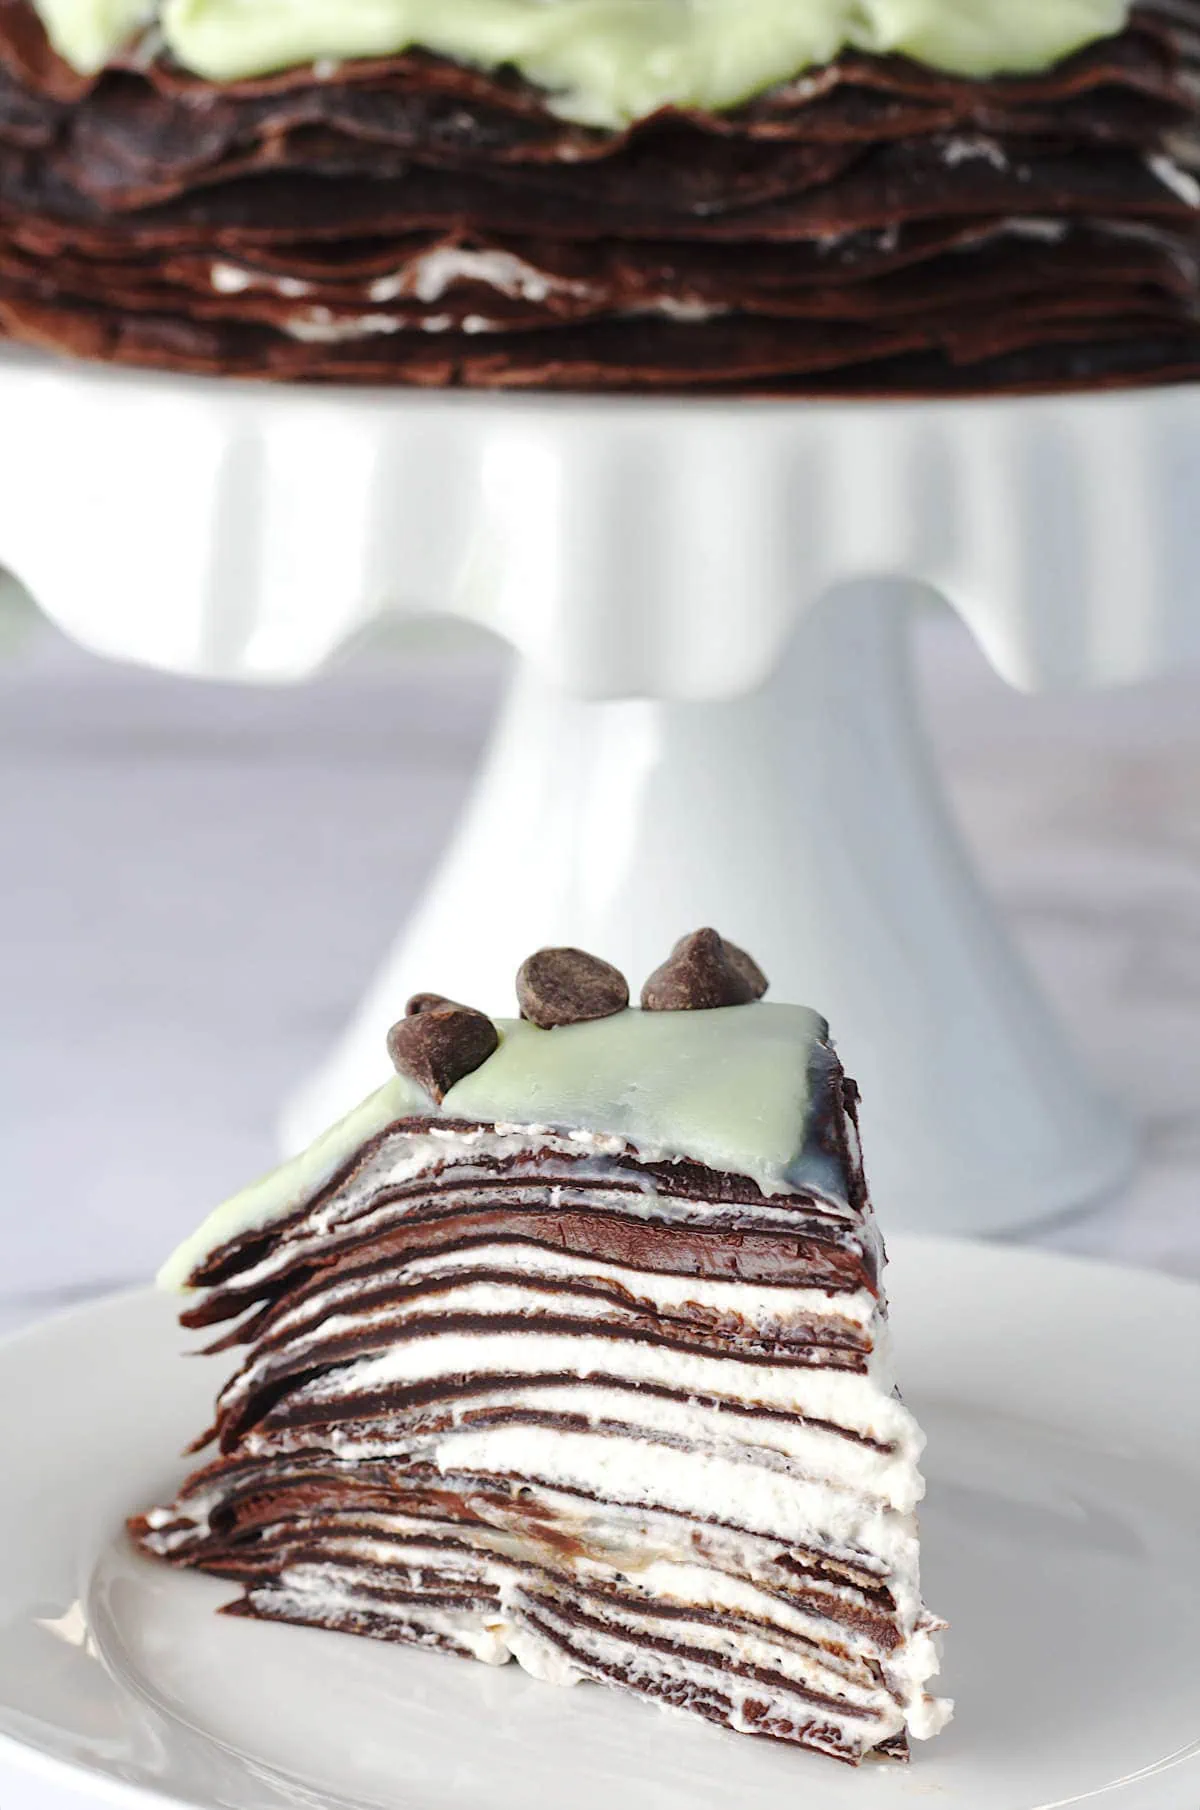 A slice of crepe cake on a white plate.  The rest of the cake is in the background on a white cake stand.